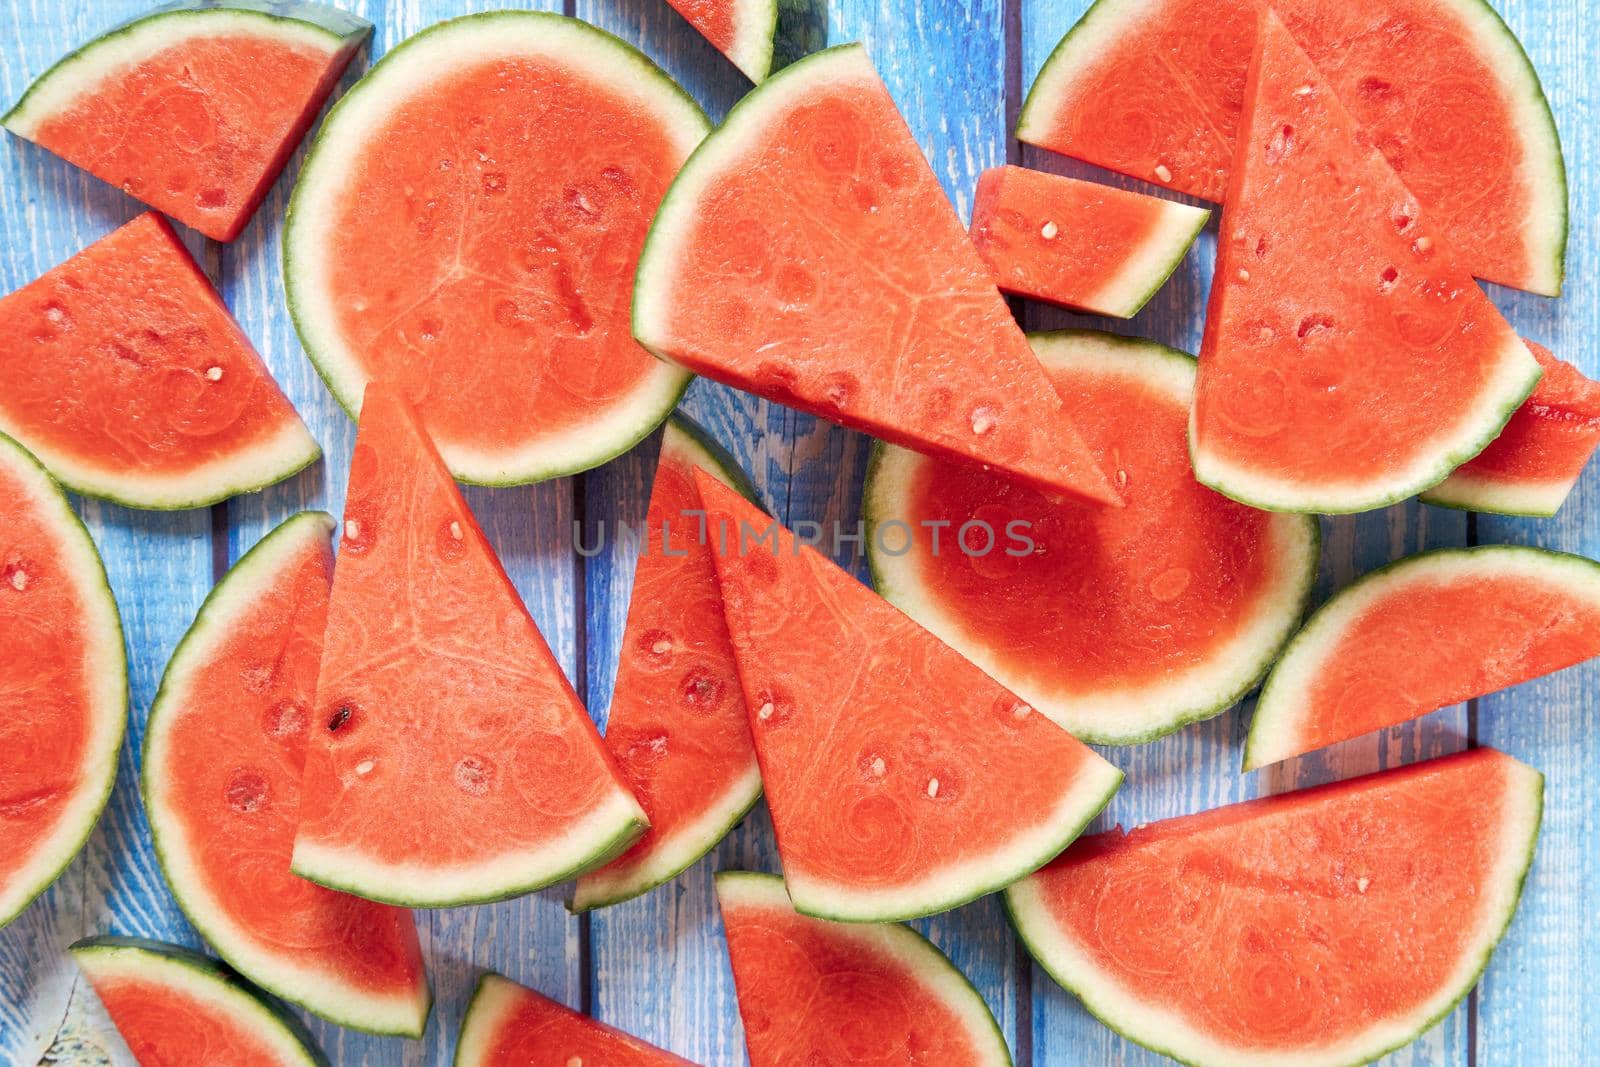 Watermelon cut into pieces to be served in a dining room